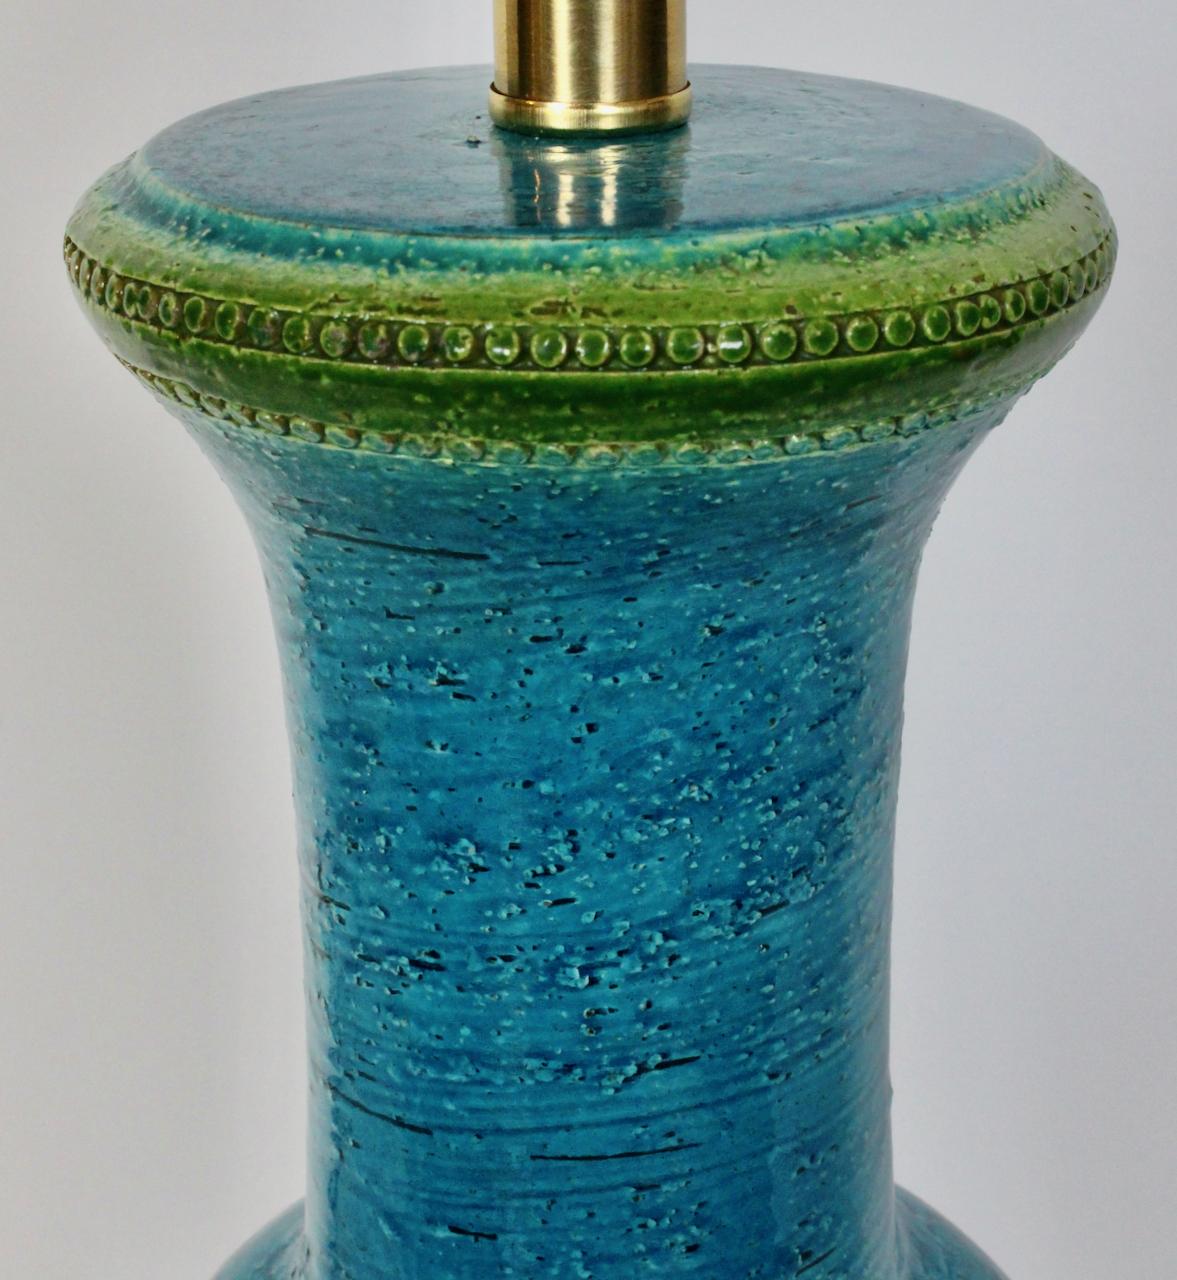 Substantial Aldo Londi Bitossi Turquoise with Top Green Stripe Table Lamp, 1950s For Sale 1